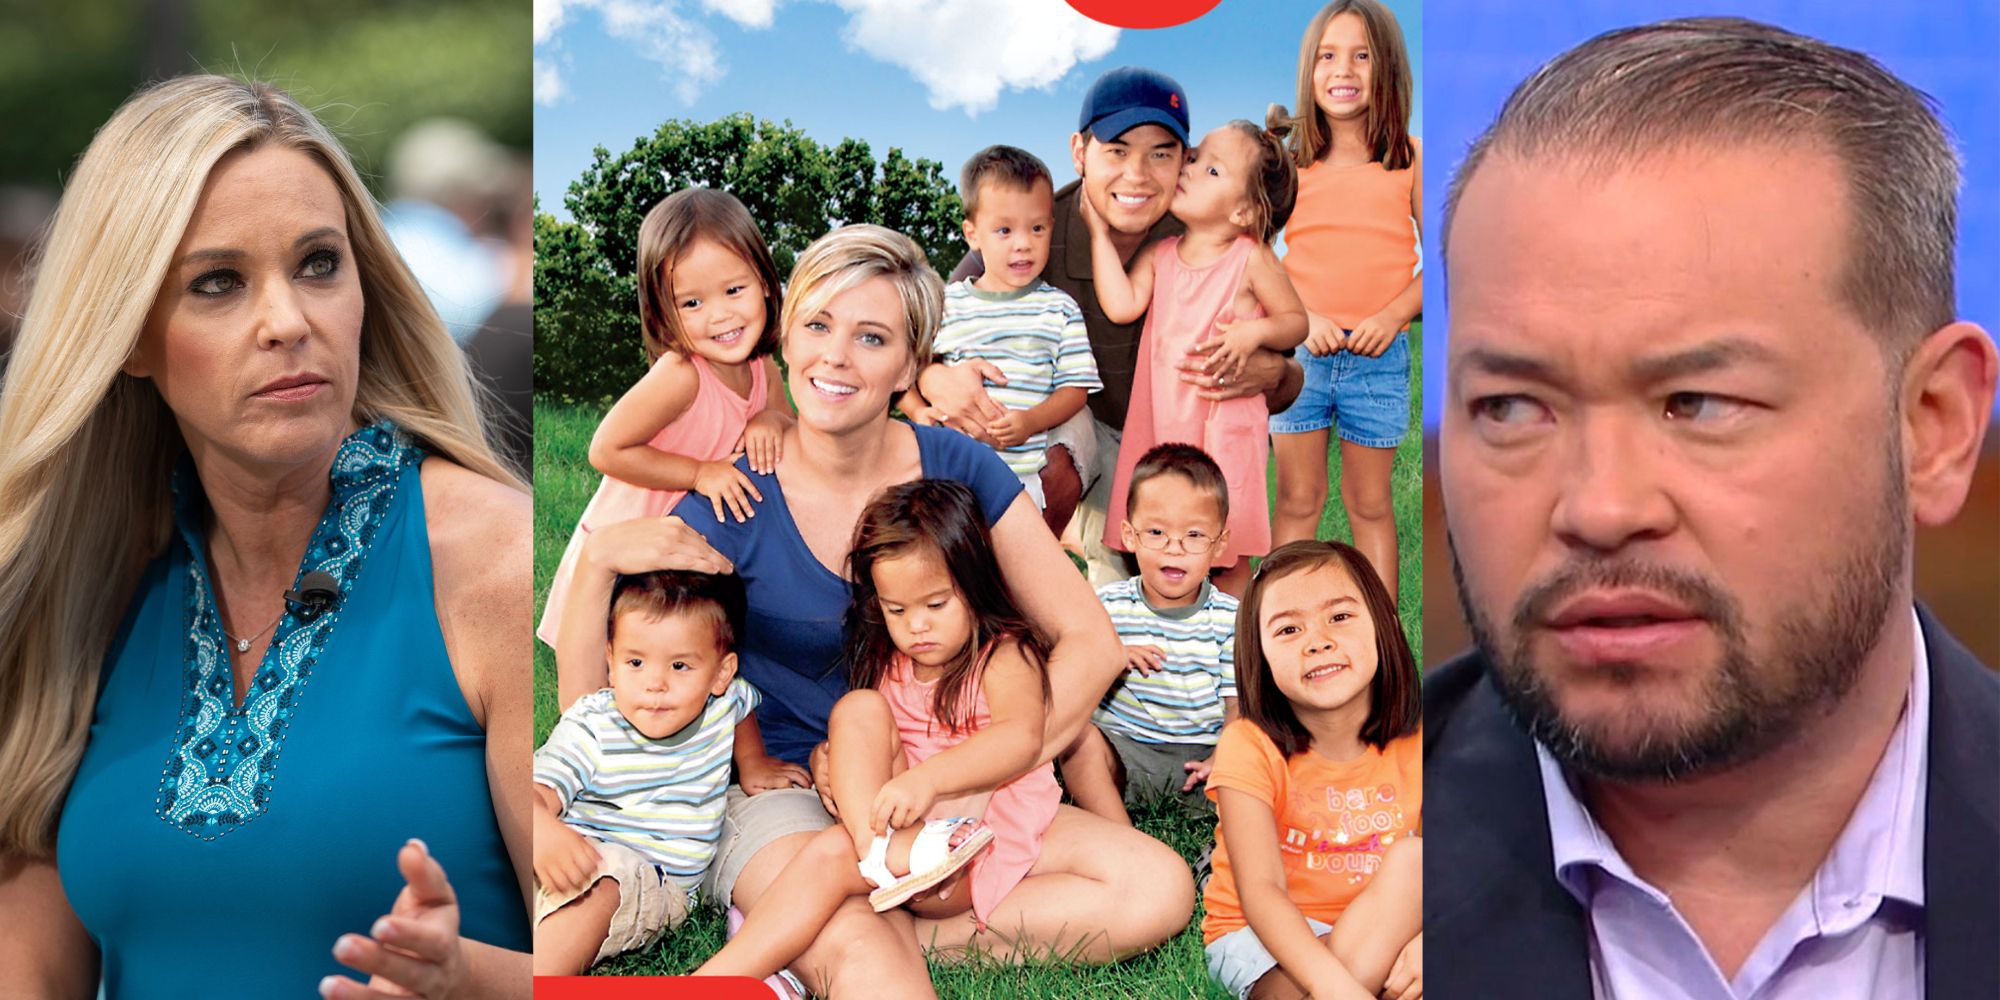 Split image of Kate looking right, an early season poster of Jon & Kate Plus 8 where they are hugging the kids, and Jon looking left